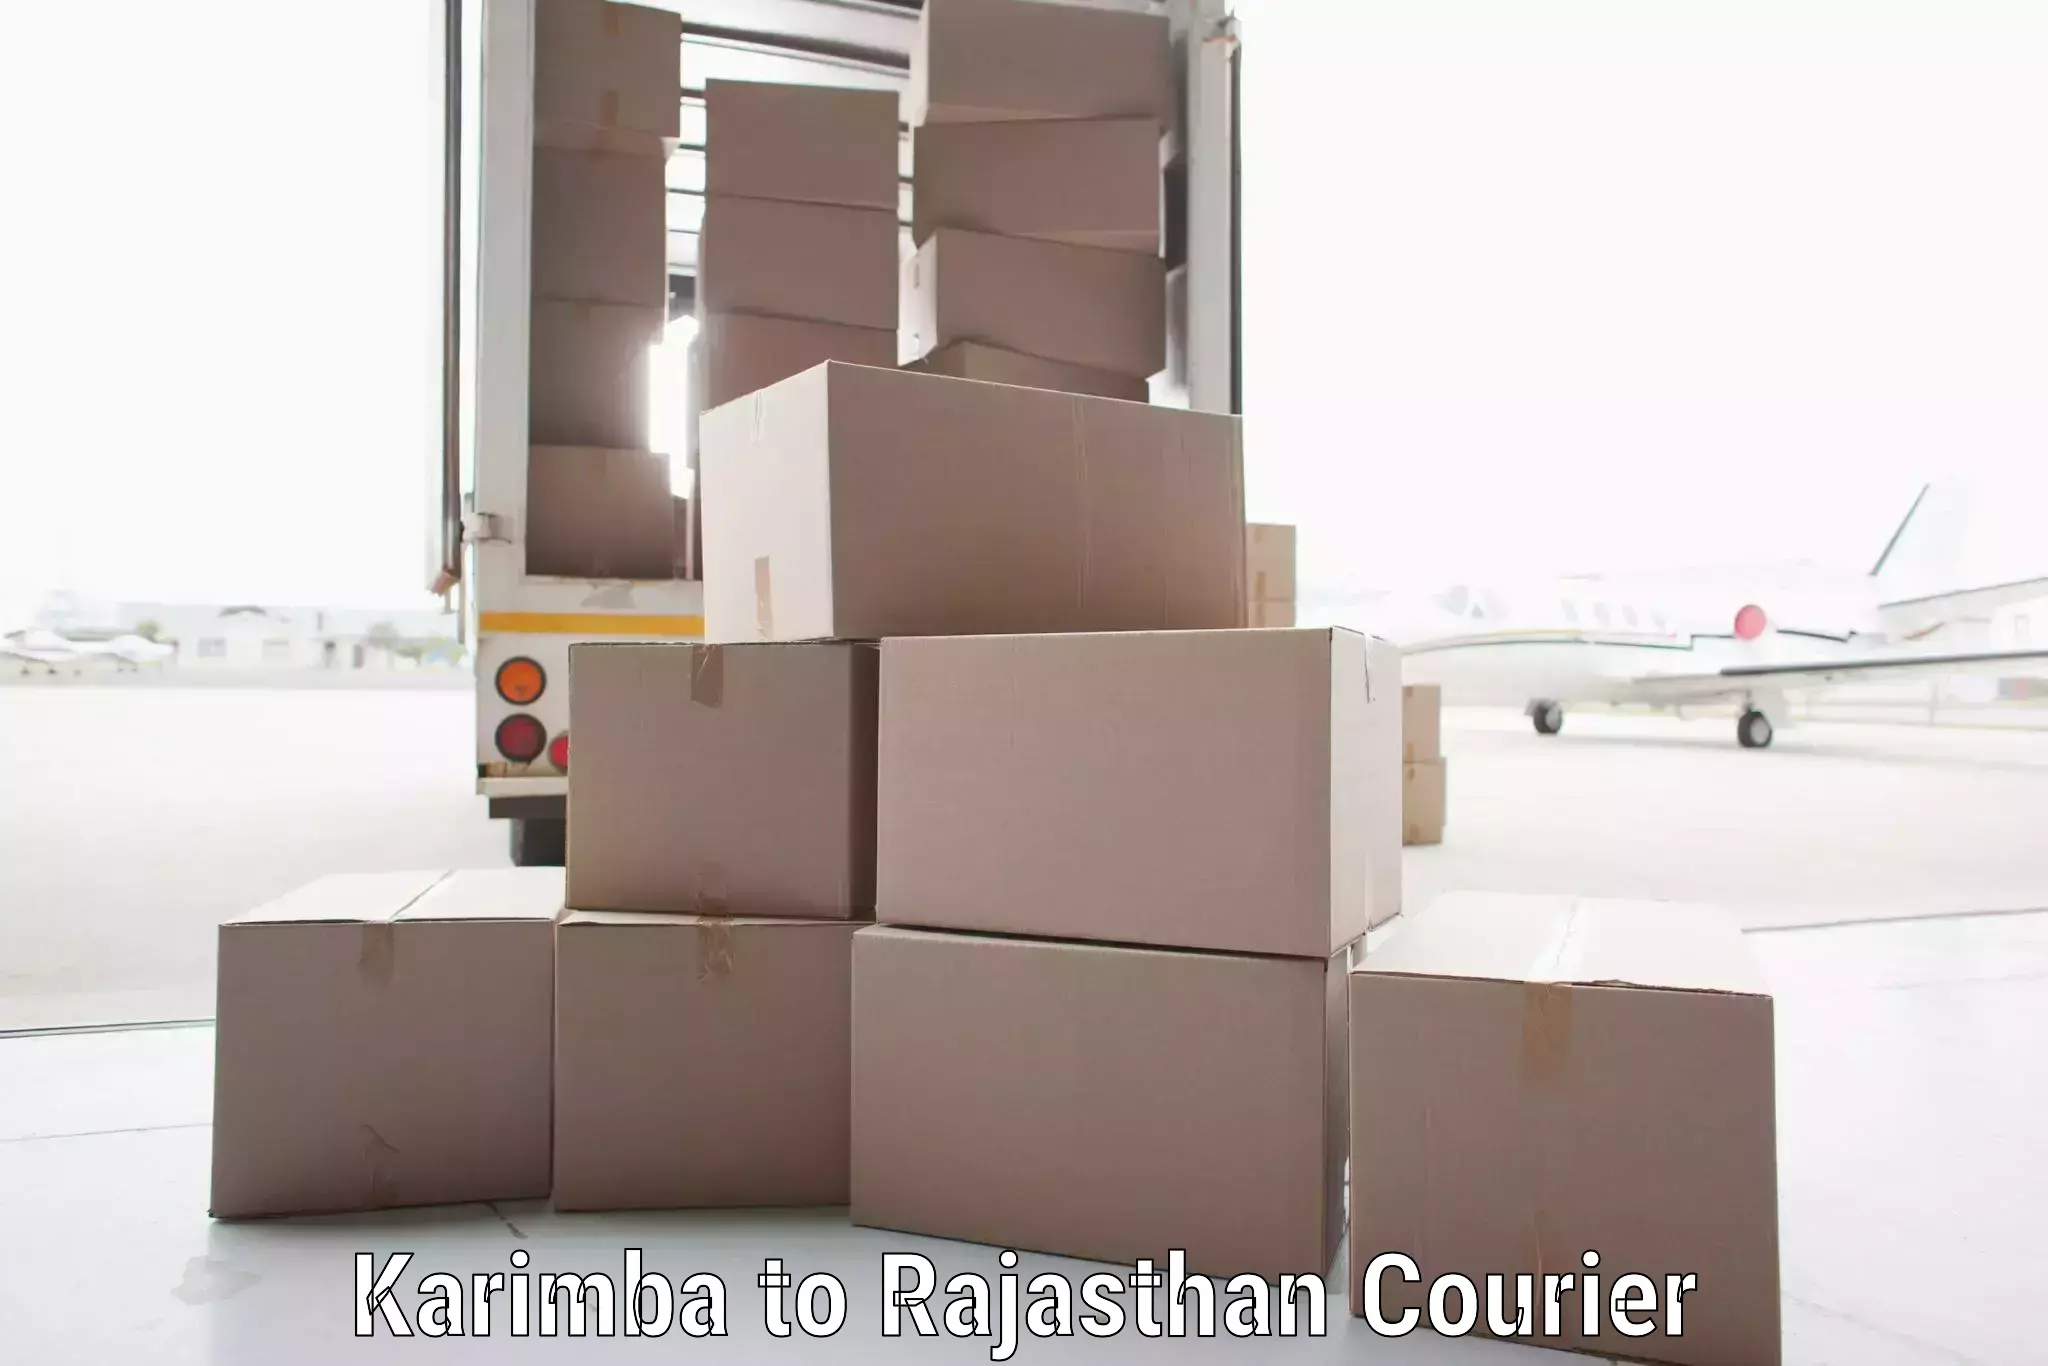 High-priority parcel service Karimba to Piparcity